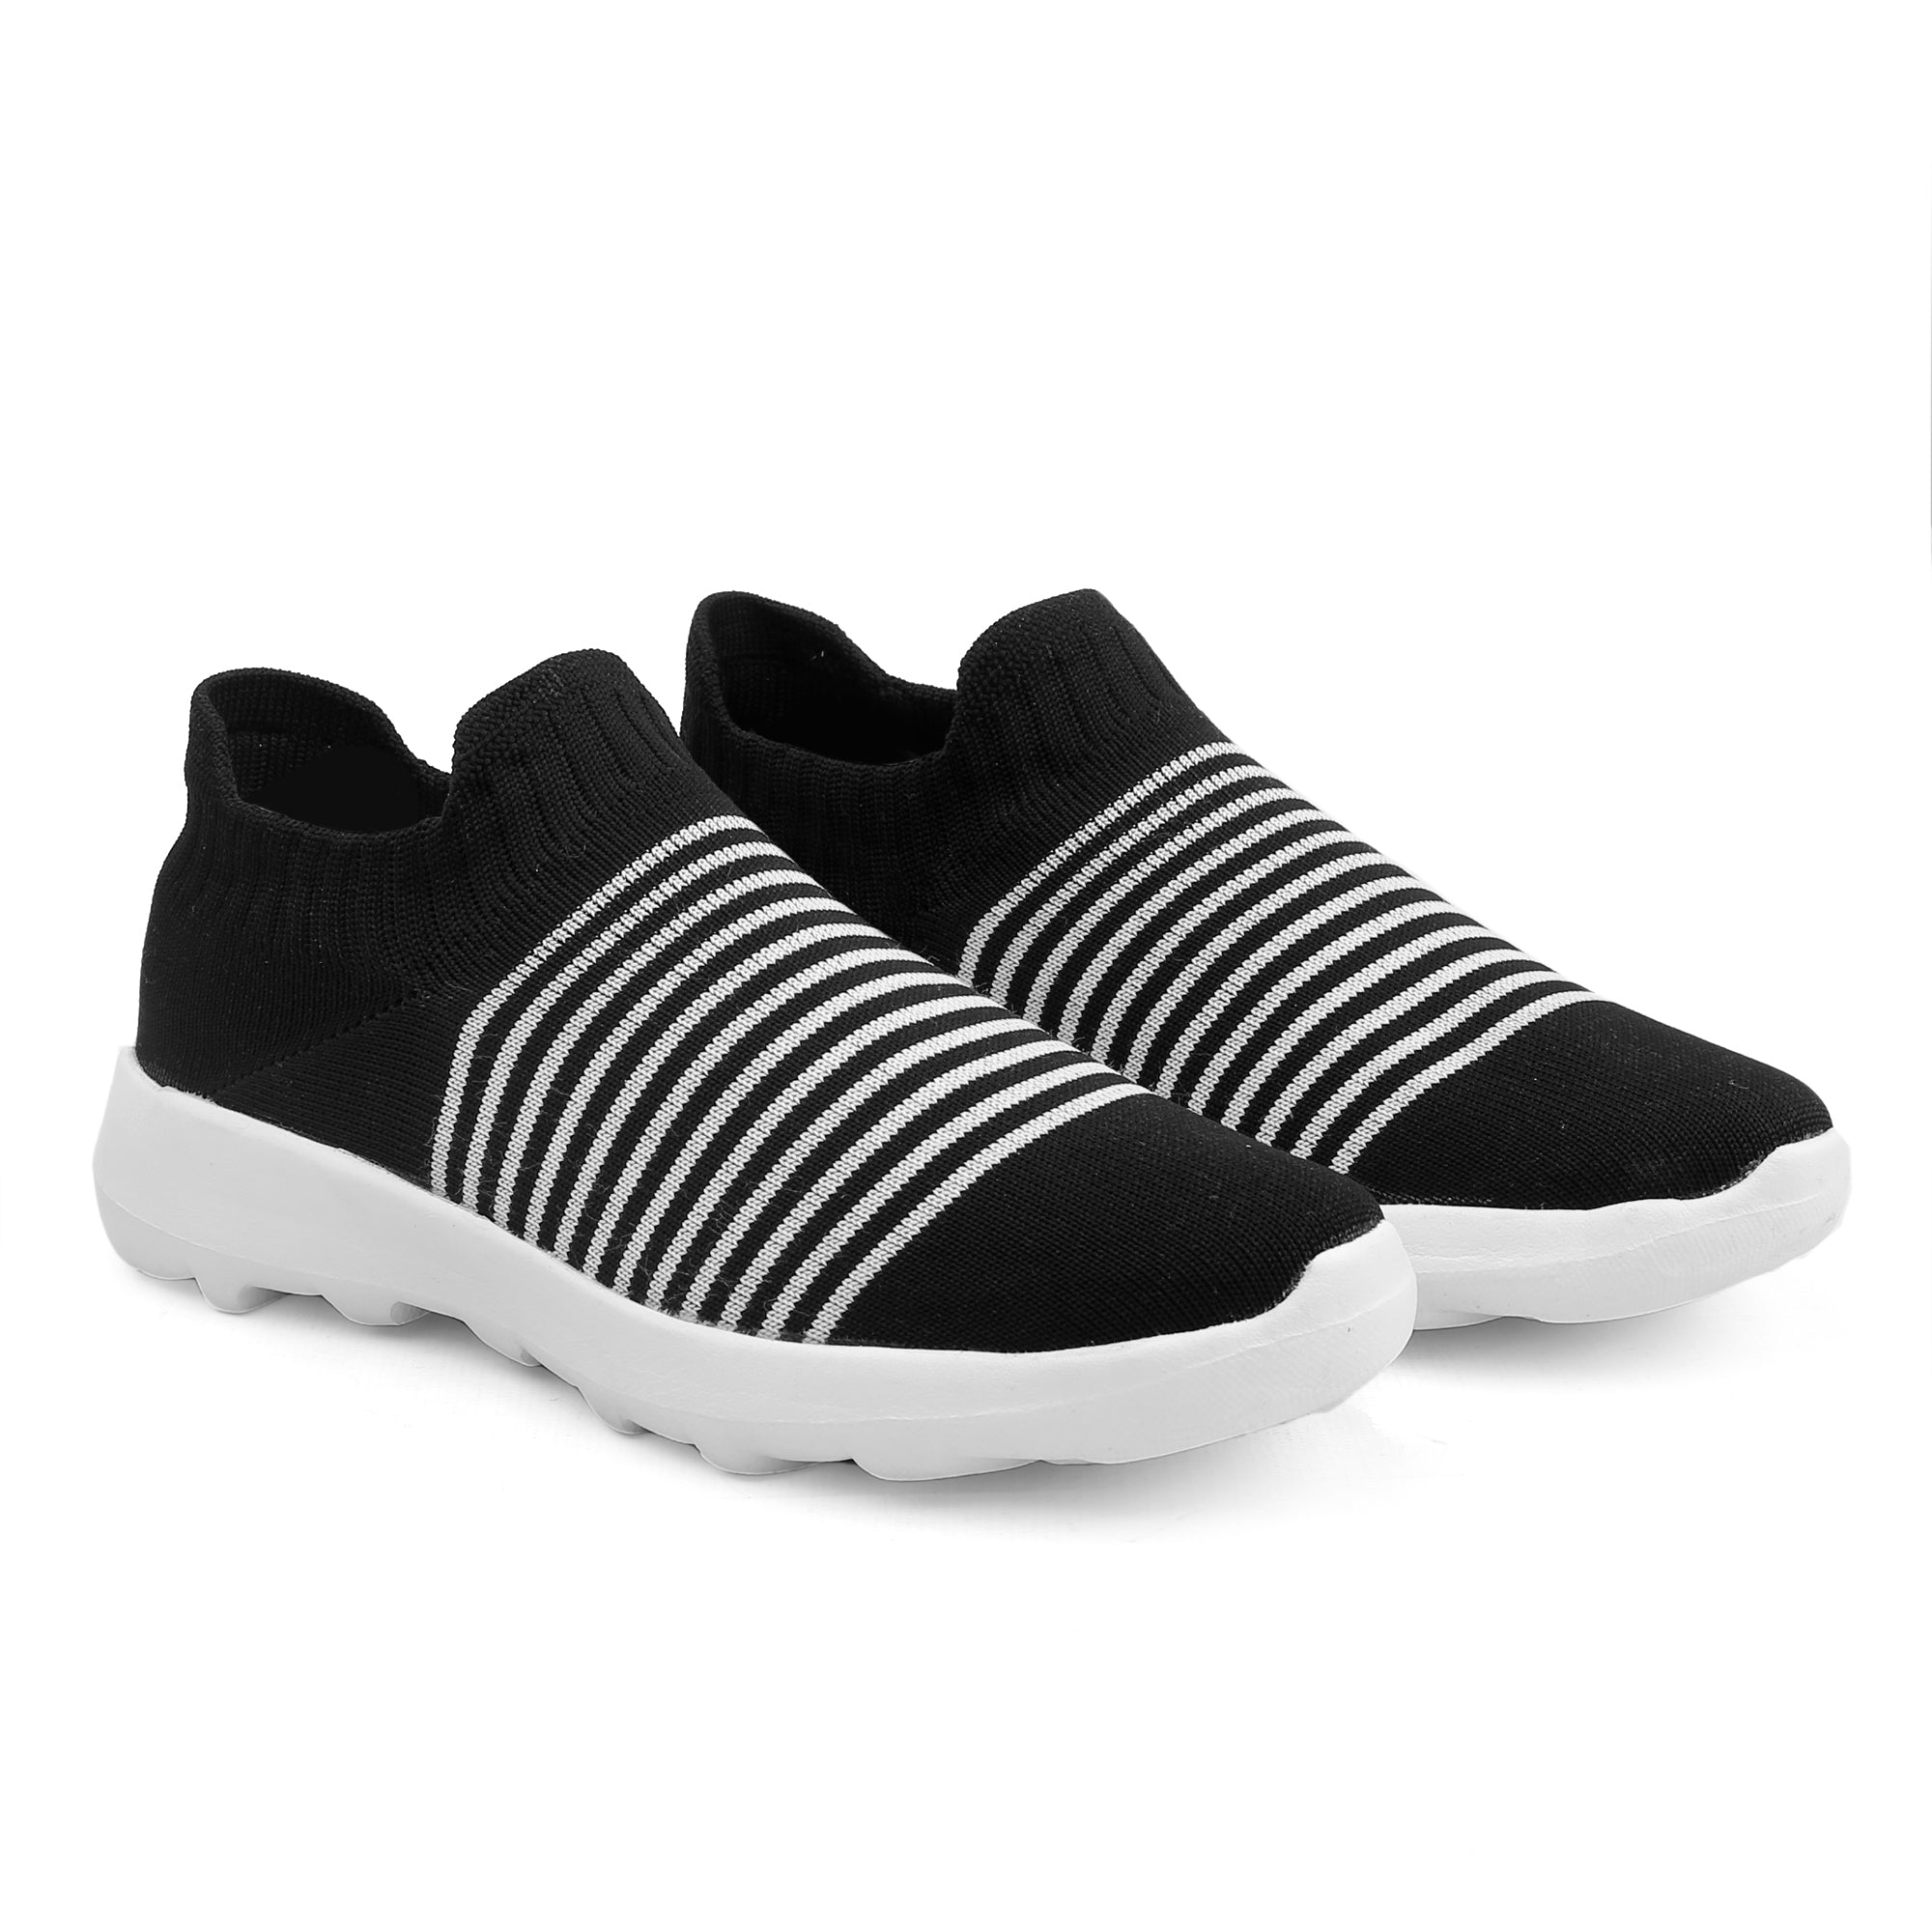 attitudist-black-light-weight-all-day-comfy-sports-shoes-for-men-20